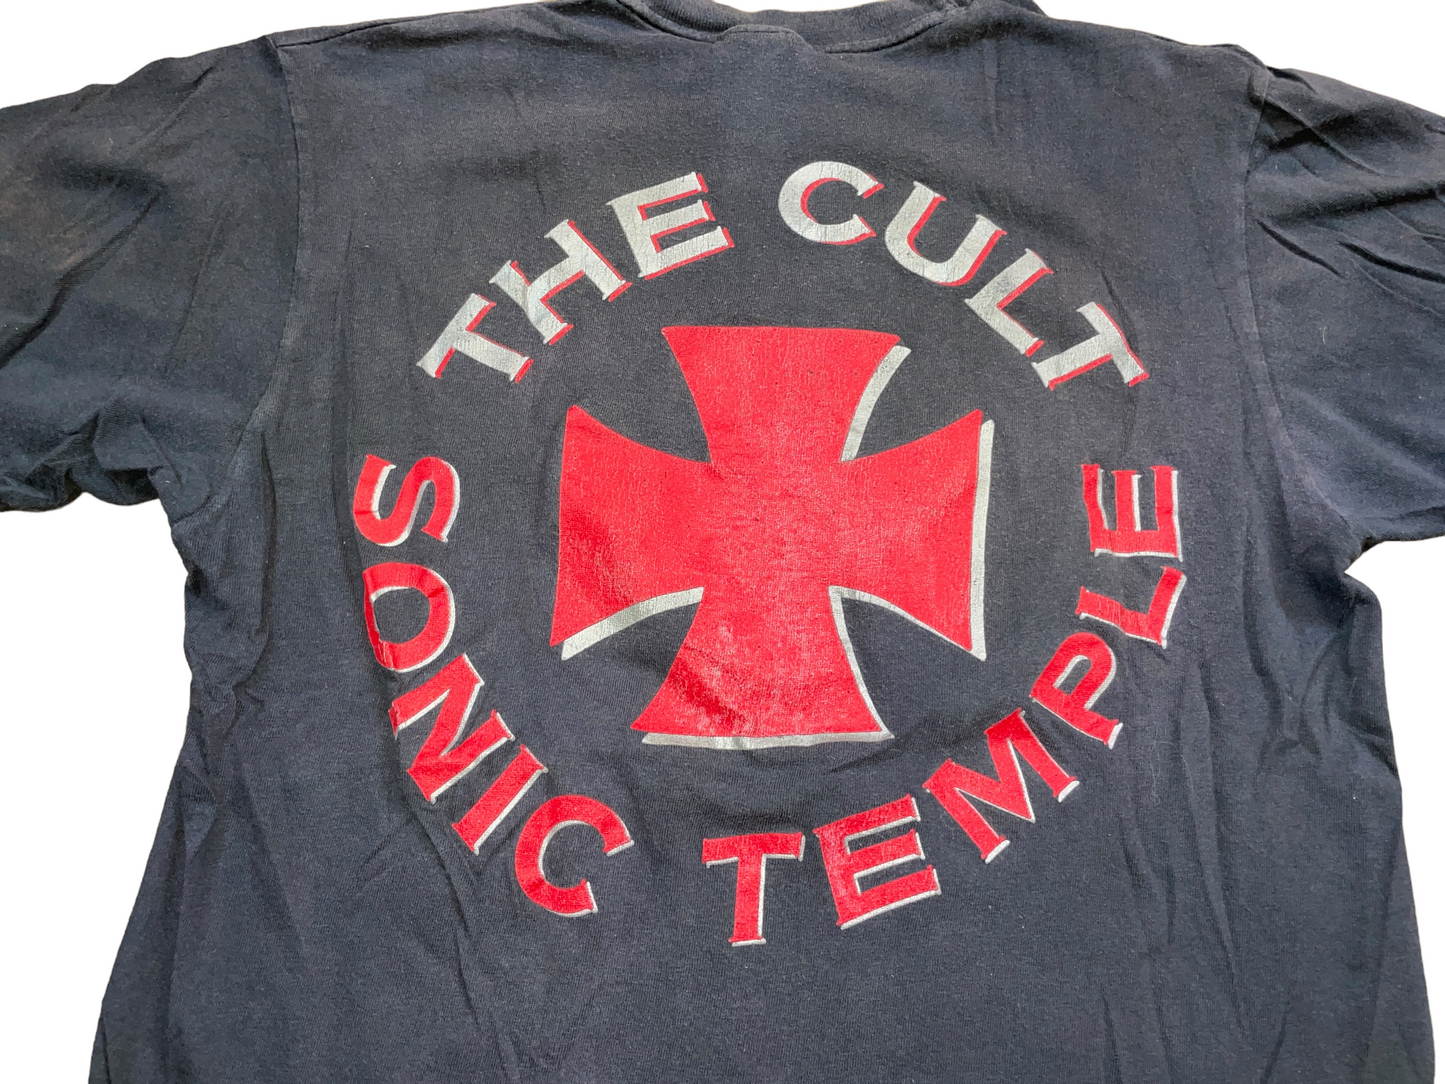 Vintage 80's The Cult Sonic Temple T-Shirt